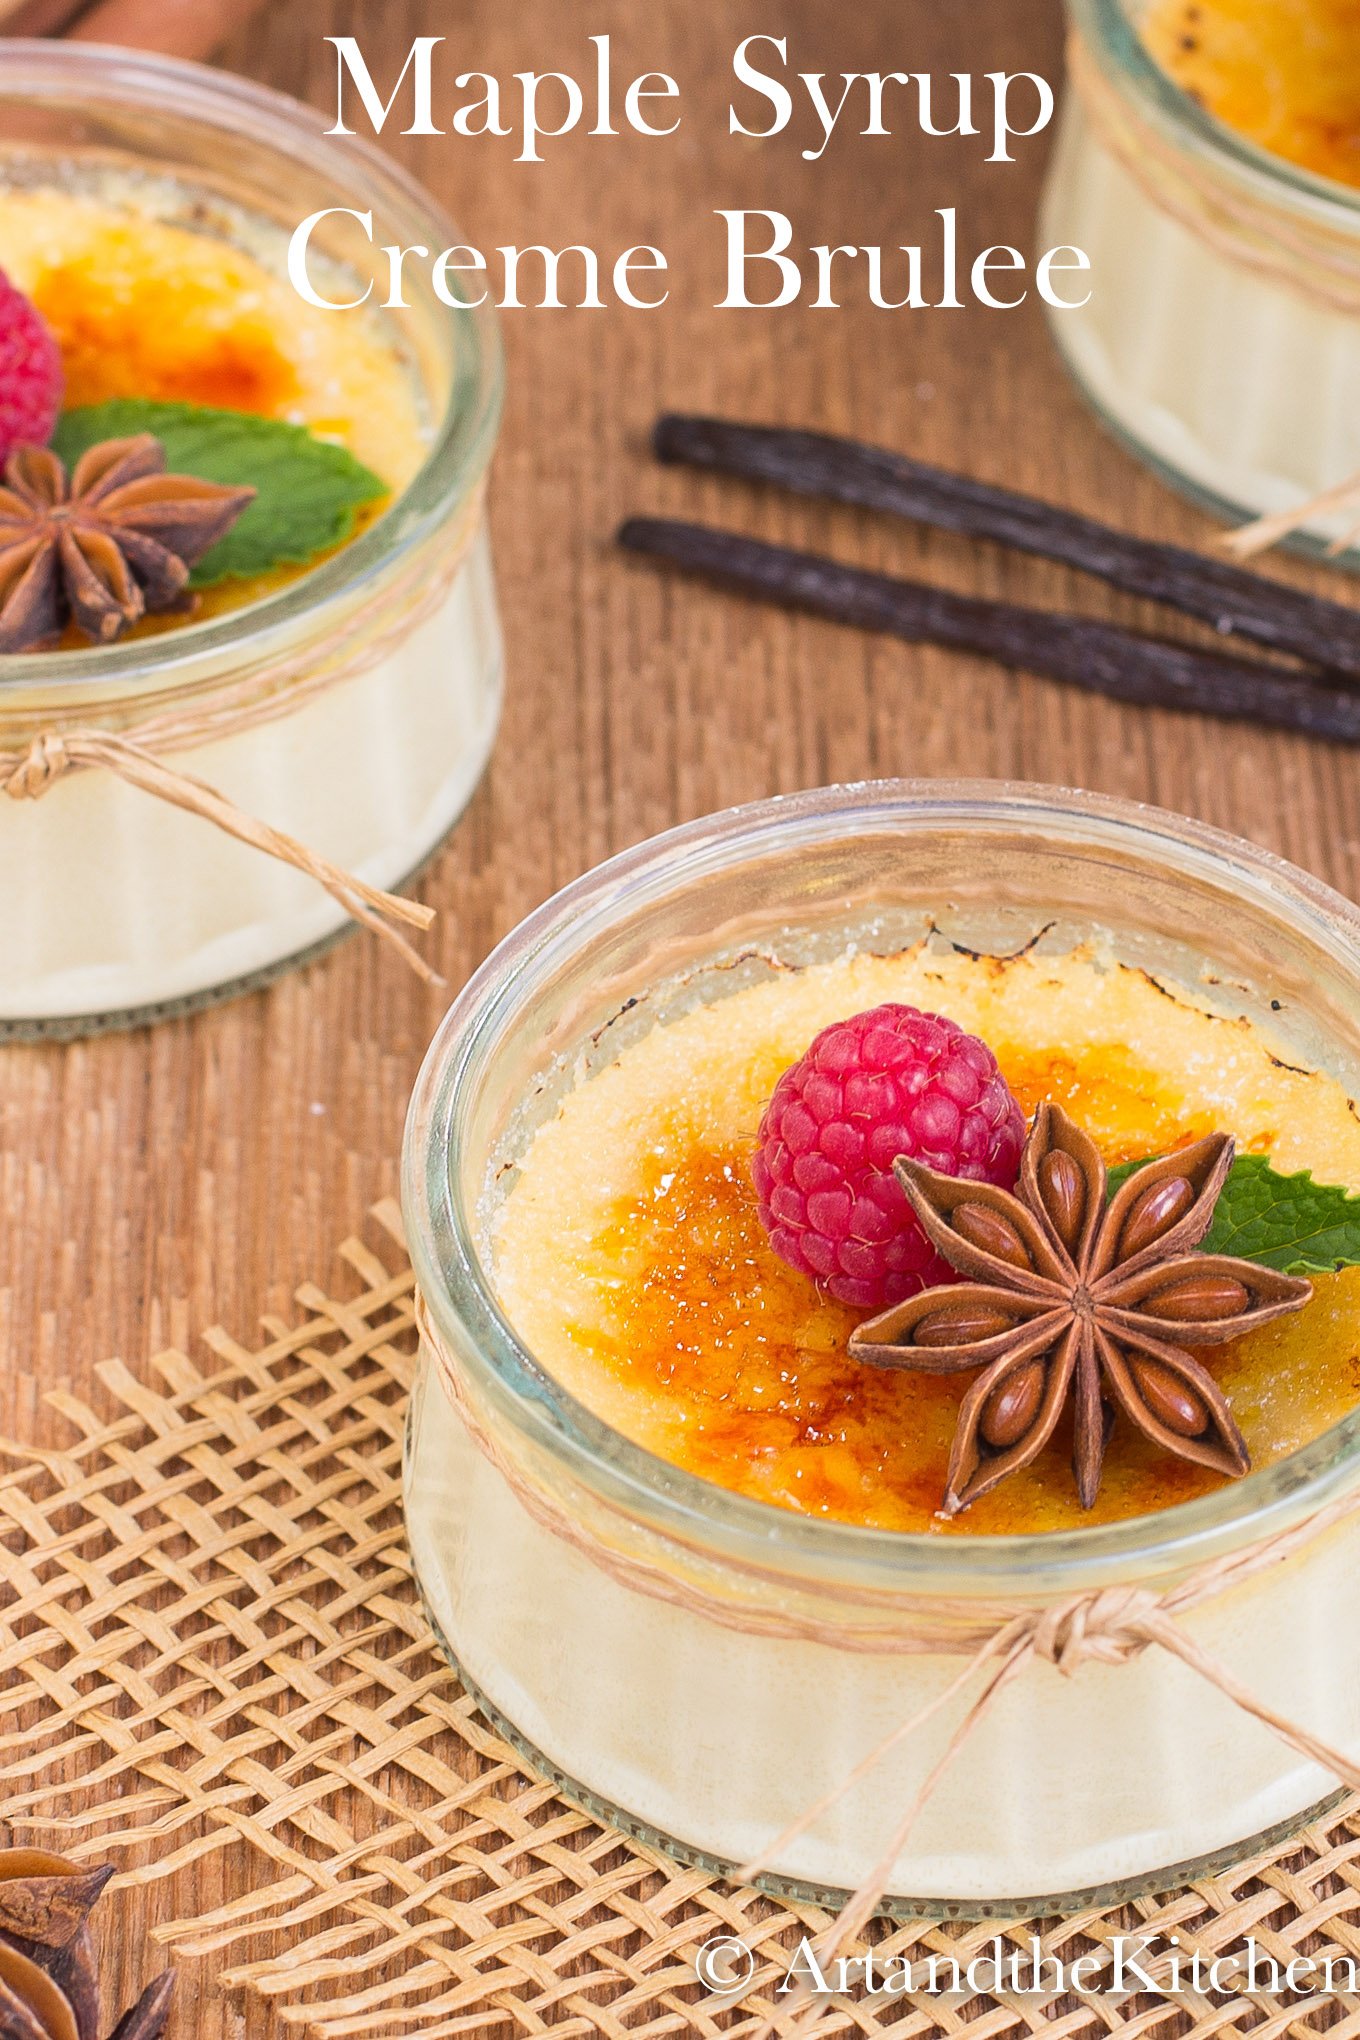 Maple Syrup Creme Brulee